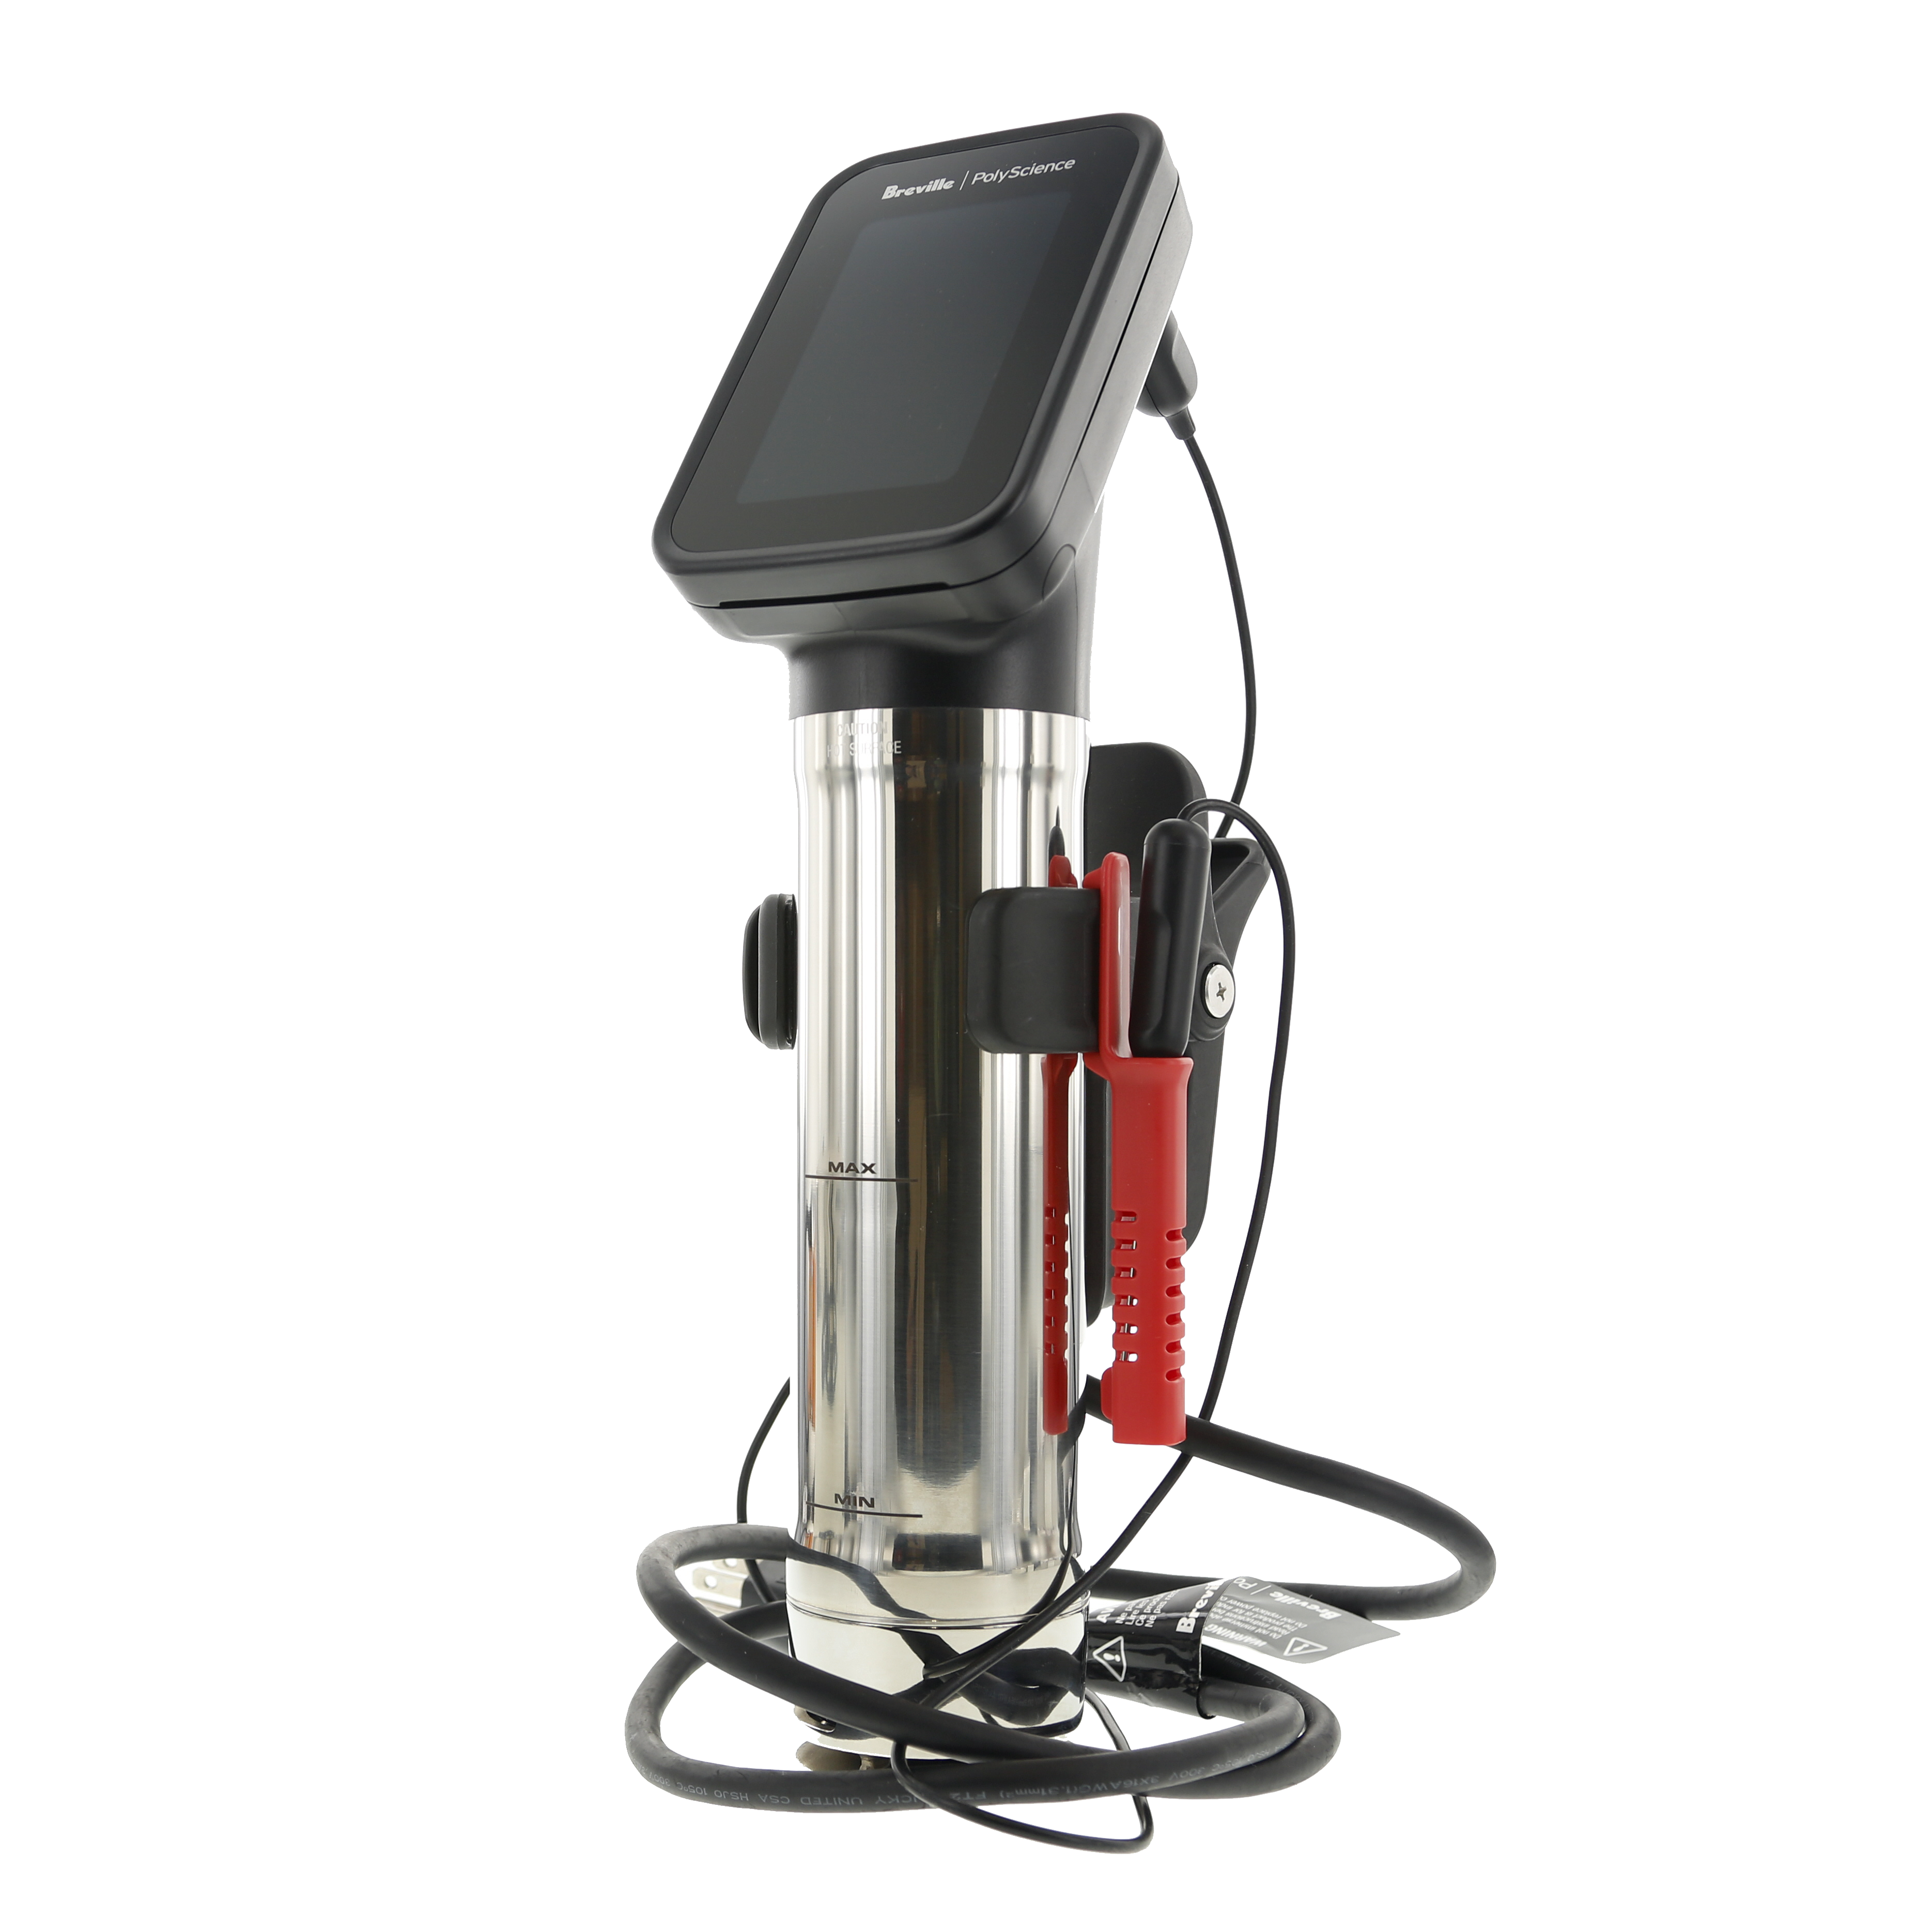 Breville PolyScience sous vide immersion circulator - Reviewed